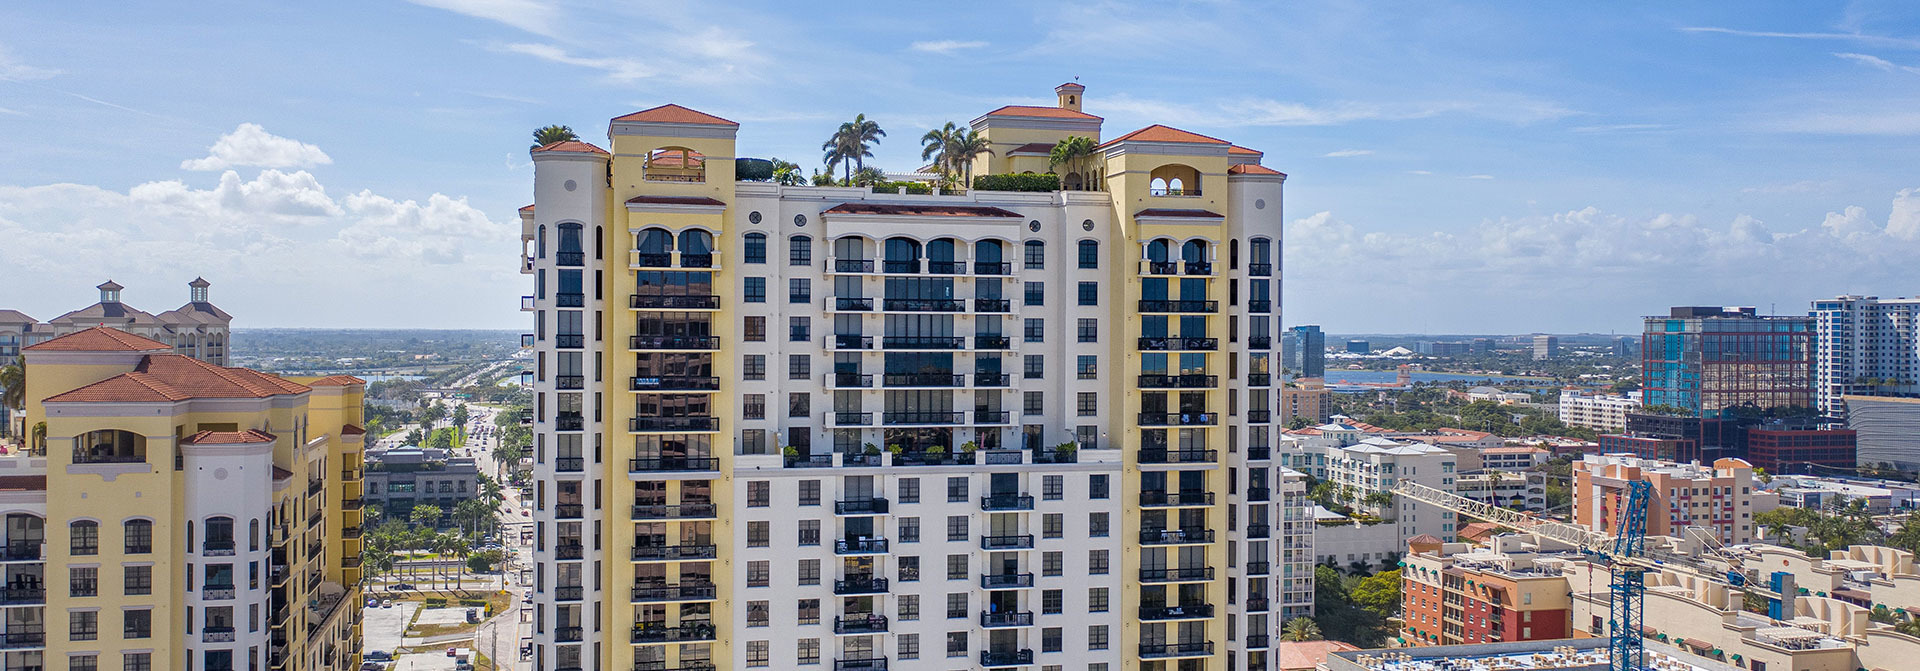 Two City Plaza Condos For Sale in West Palm Beach